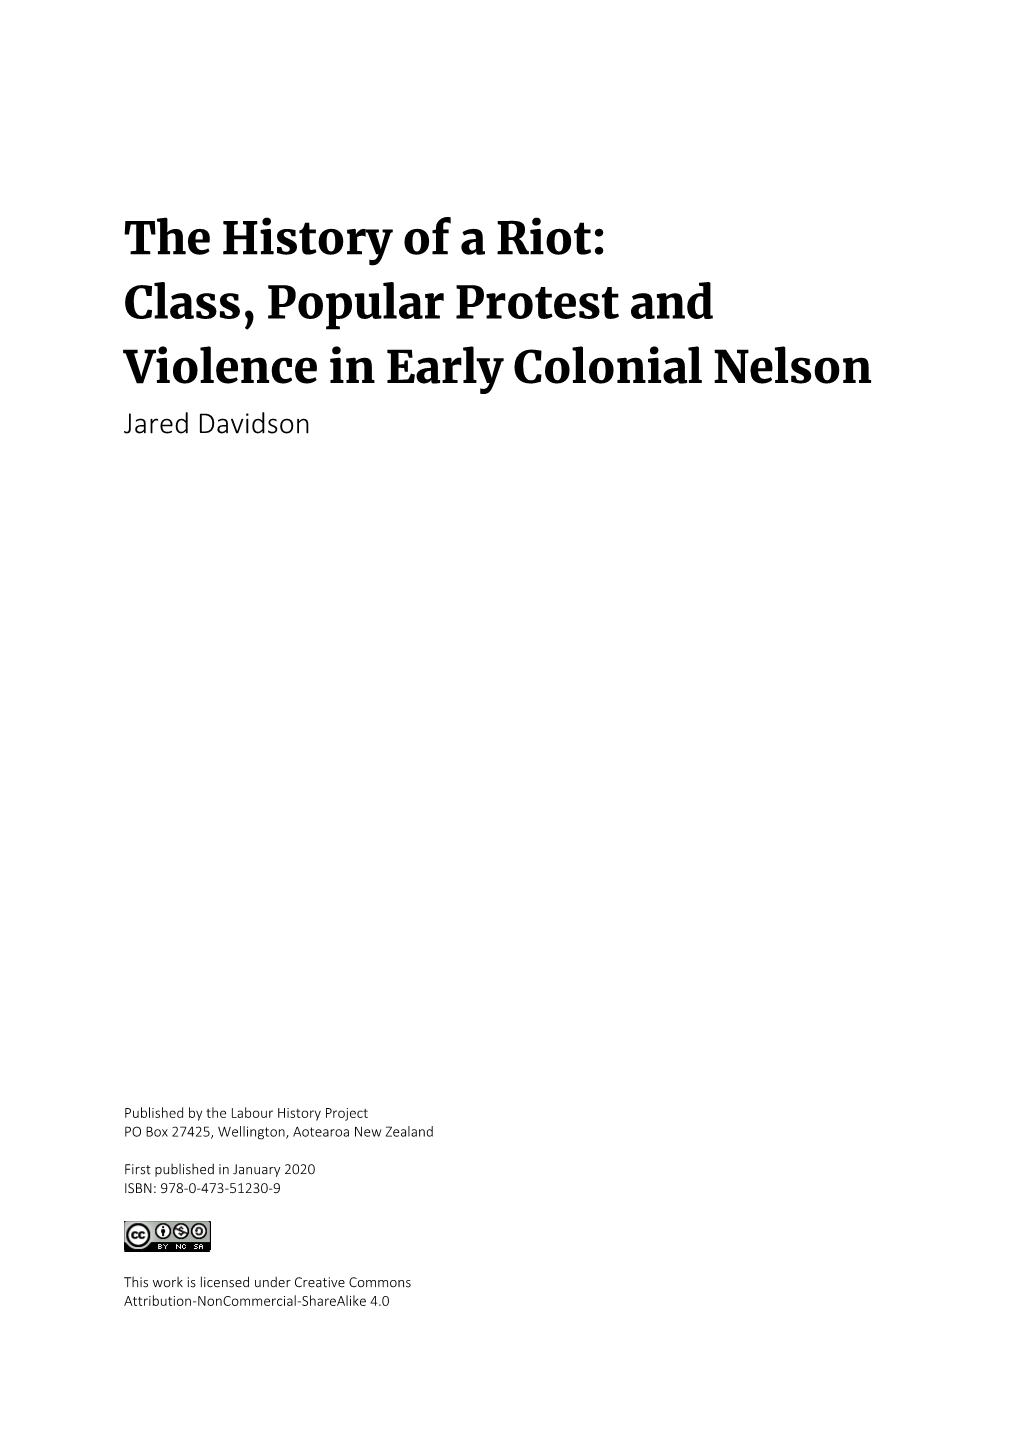 The History of a Riot: Class, Popular Protest and Violence in Early Colonial Nelson Jared Davidson